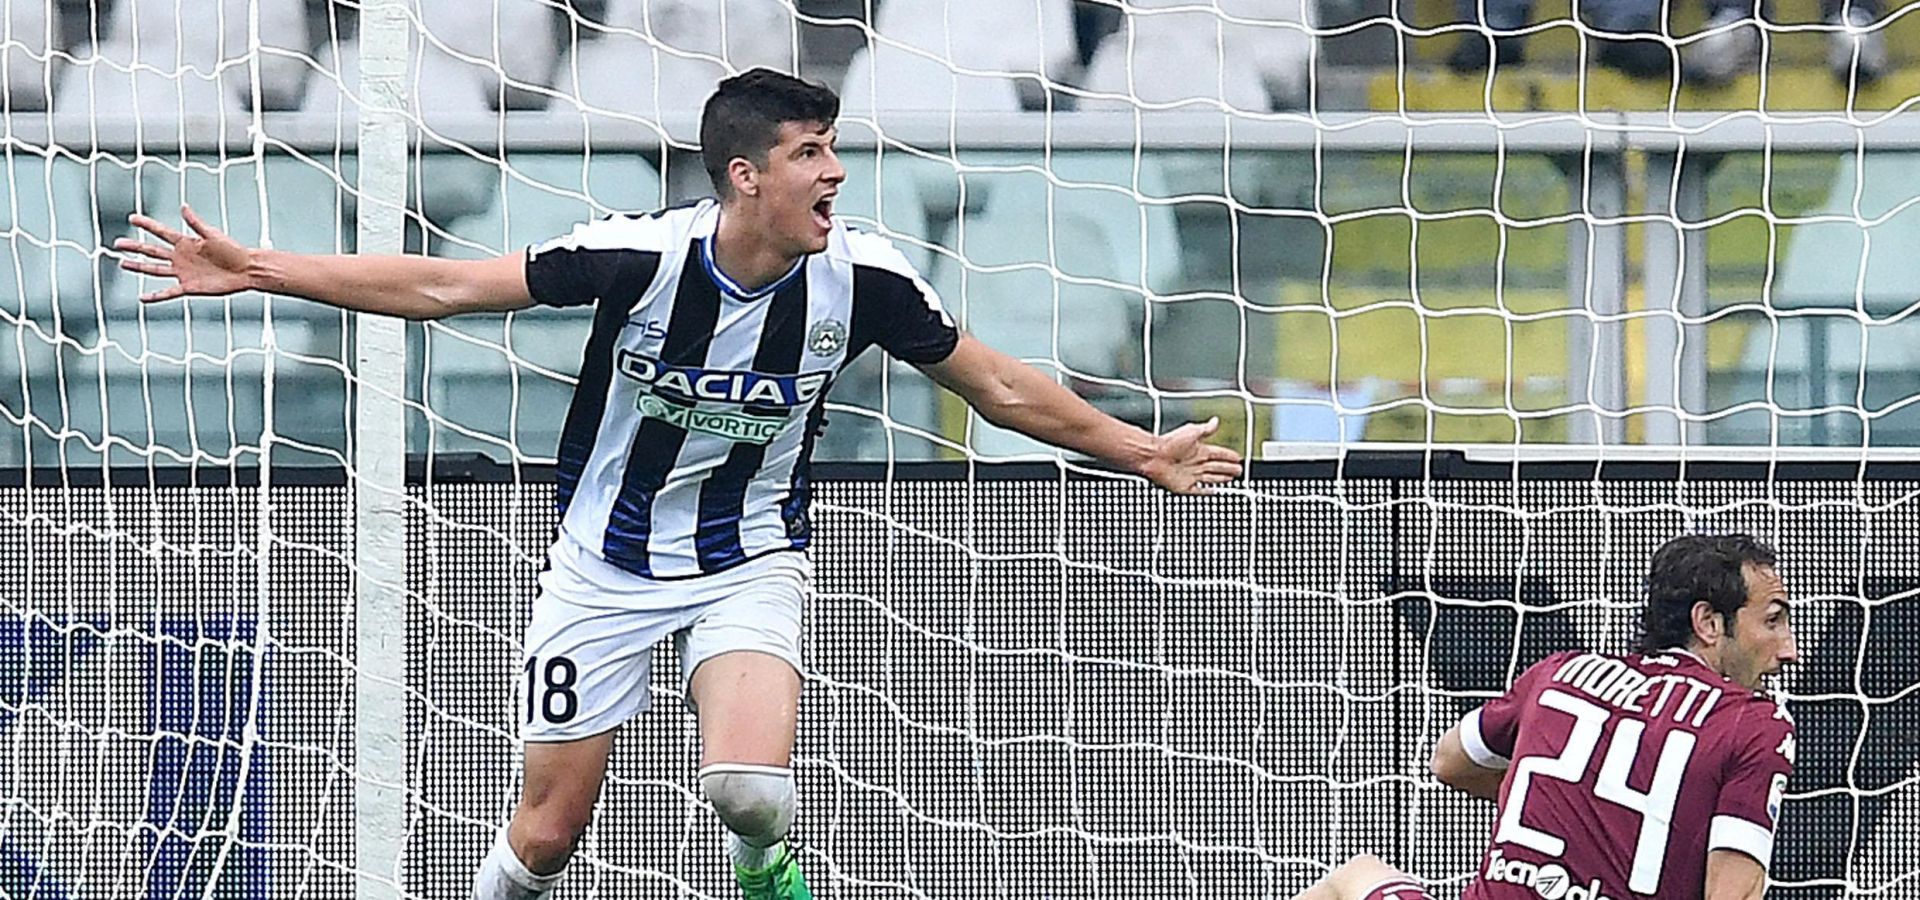 epa05884363 Udinese's Stipe Perica (L) jubilates after scoring a goal during the Italian Serie A soccer match Torino FC vs Udinese Calcio at Olimpico stadium in Turin, Italy, 02 April 2017.  EPA/ALESSANDRO DI MARCO